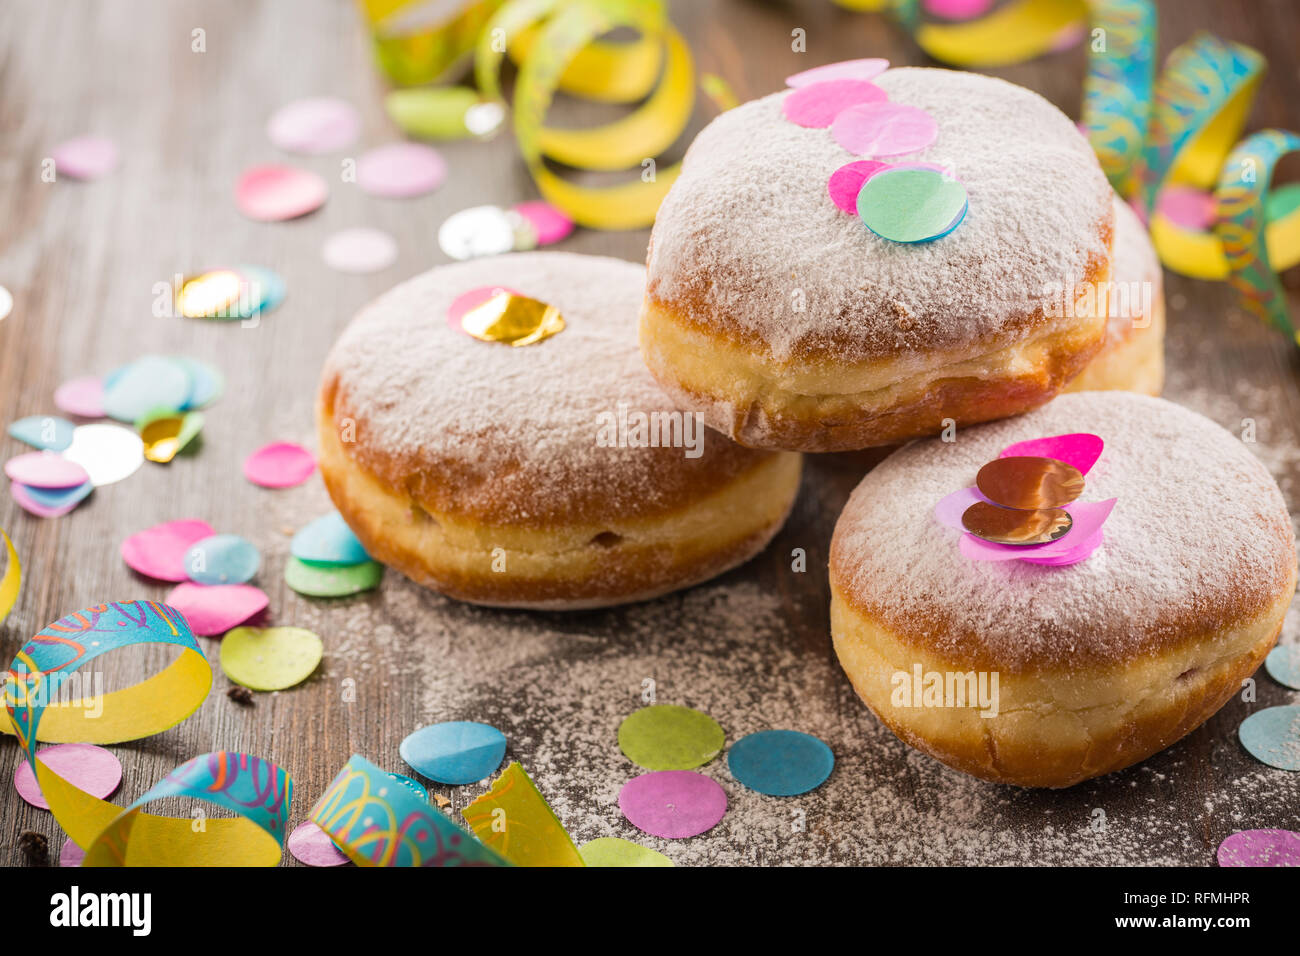 Food Whistle High Resolution Stock Photography and Images - Alamy